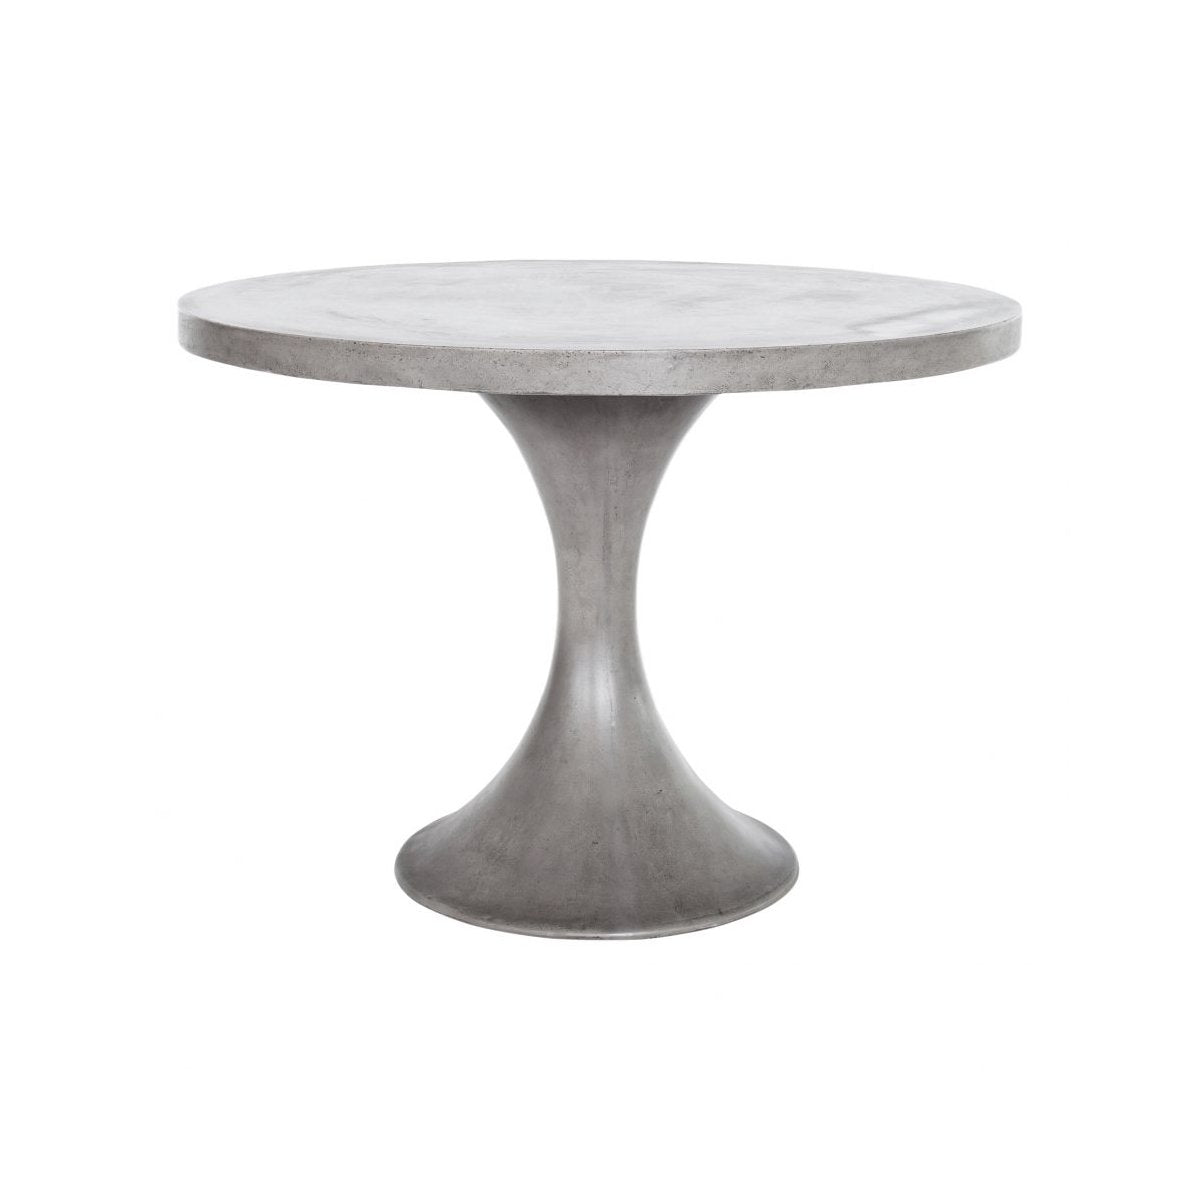 Load image into Gallery viewer, Isadora Outdoor Dining Table Dining Tables Moe&amp;#39;s     Four Hands, Burke Decor, Mid Century Modern Furniture, Old Bones Furniture Company, Old Bones Co, Modern Mid Century, Designer Furniture, https://www.oldbonesco.com/
